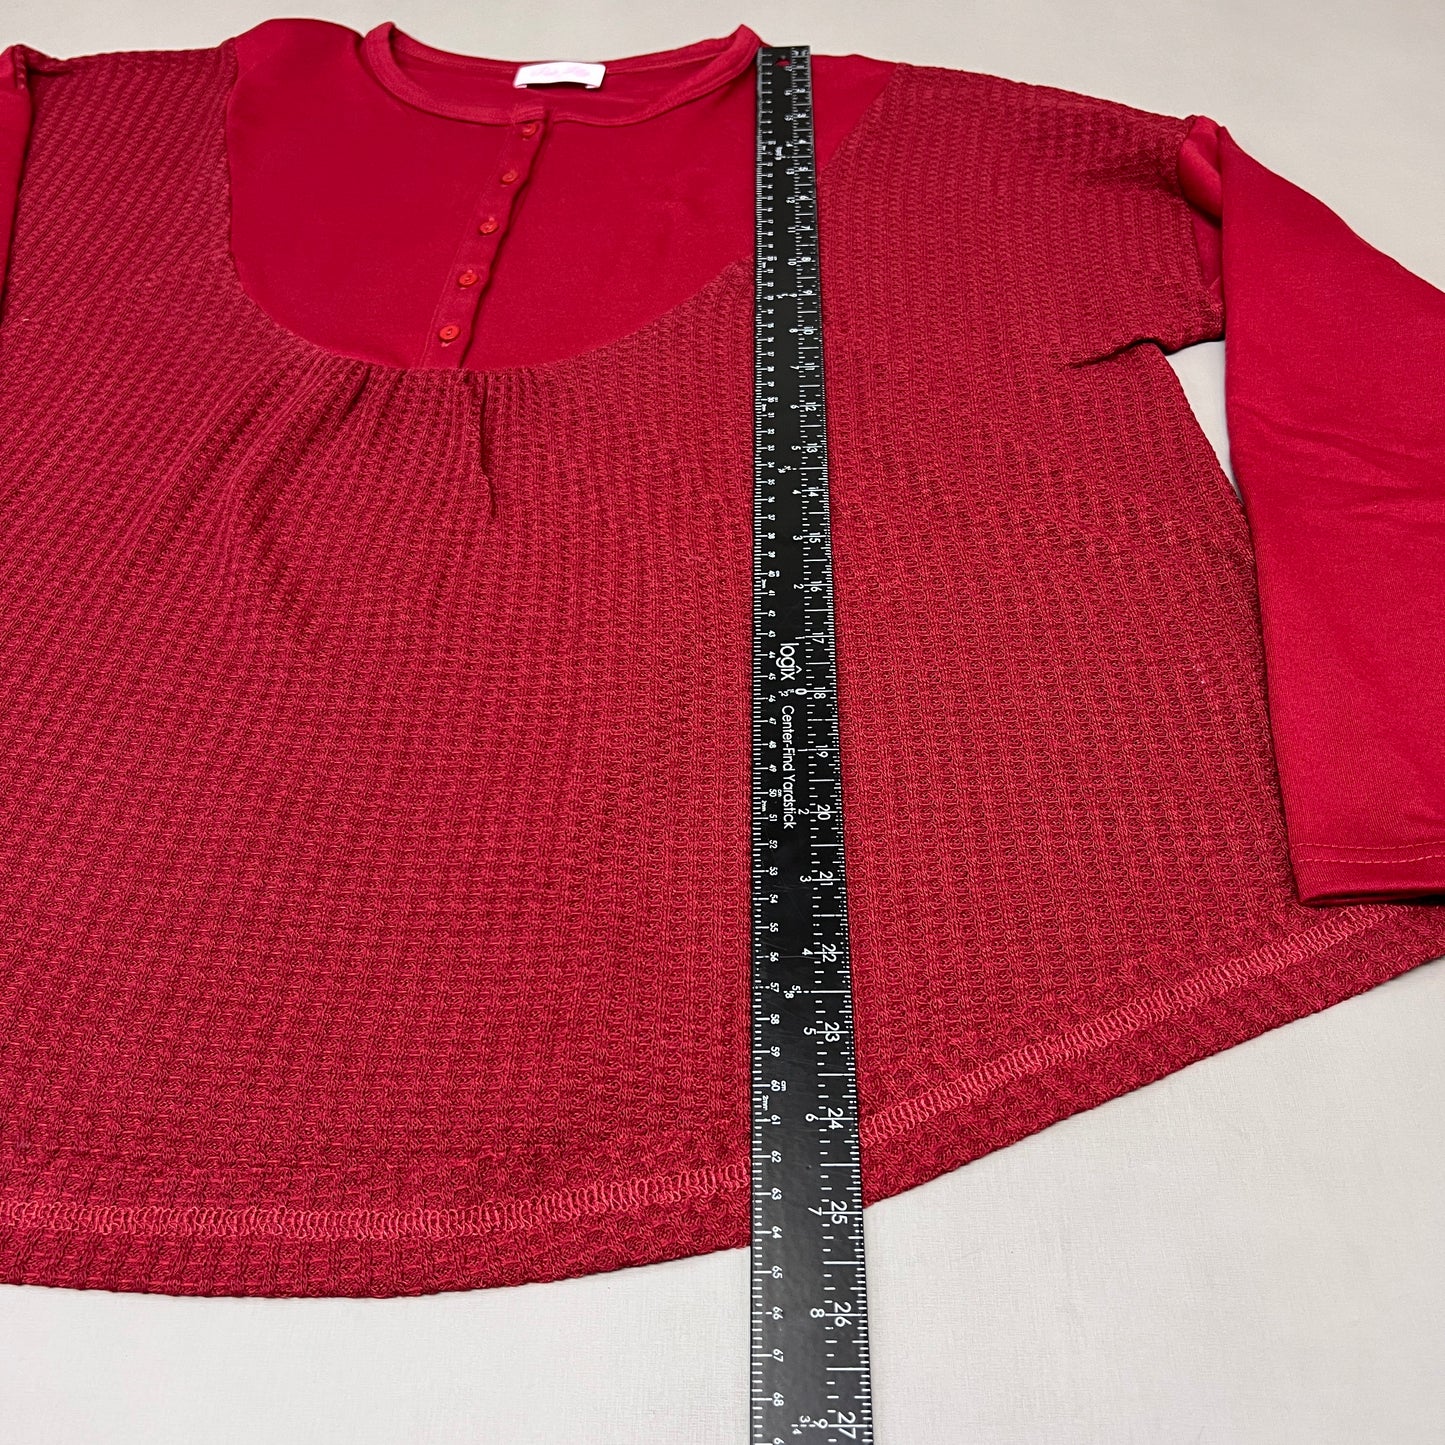 PINK LILY Take the Leap Henley Waffle Knit Blouse Women's Sz S Cranberry PL903 (New)